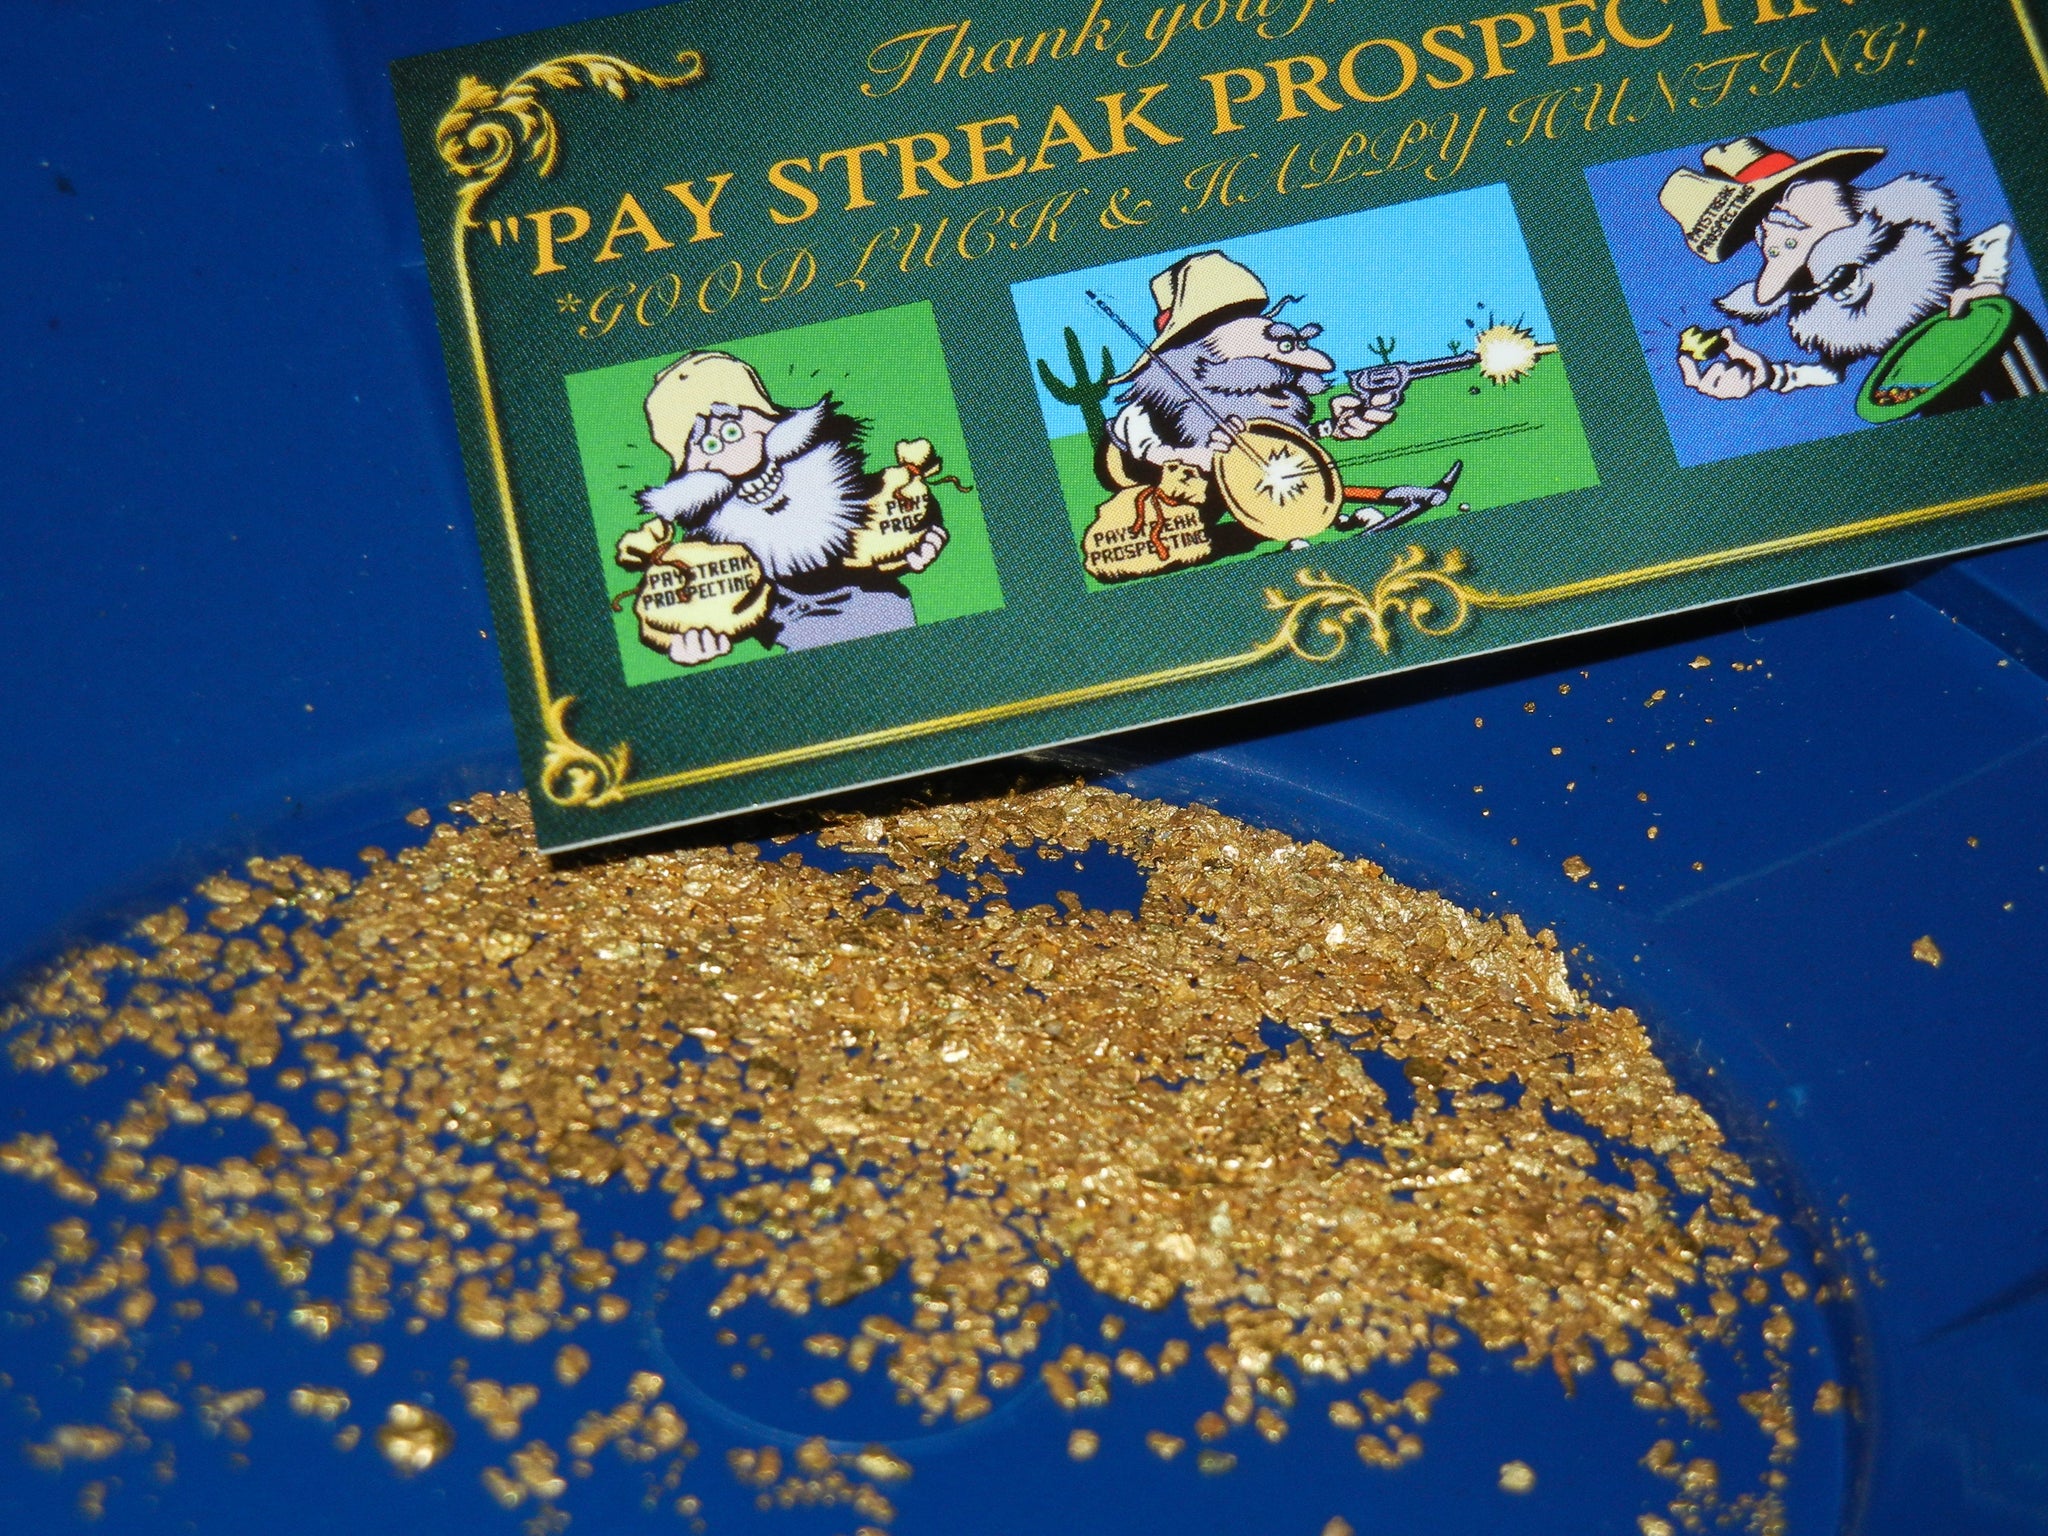 3 Lb. Rich Gold Paydirt Concentrates Unsearched – Pay Streak Prospecting